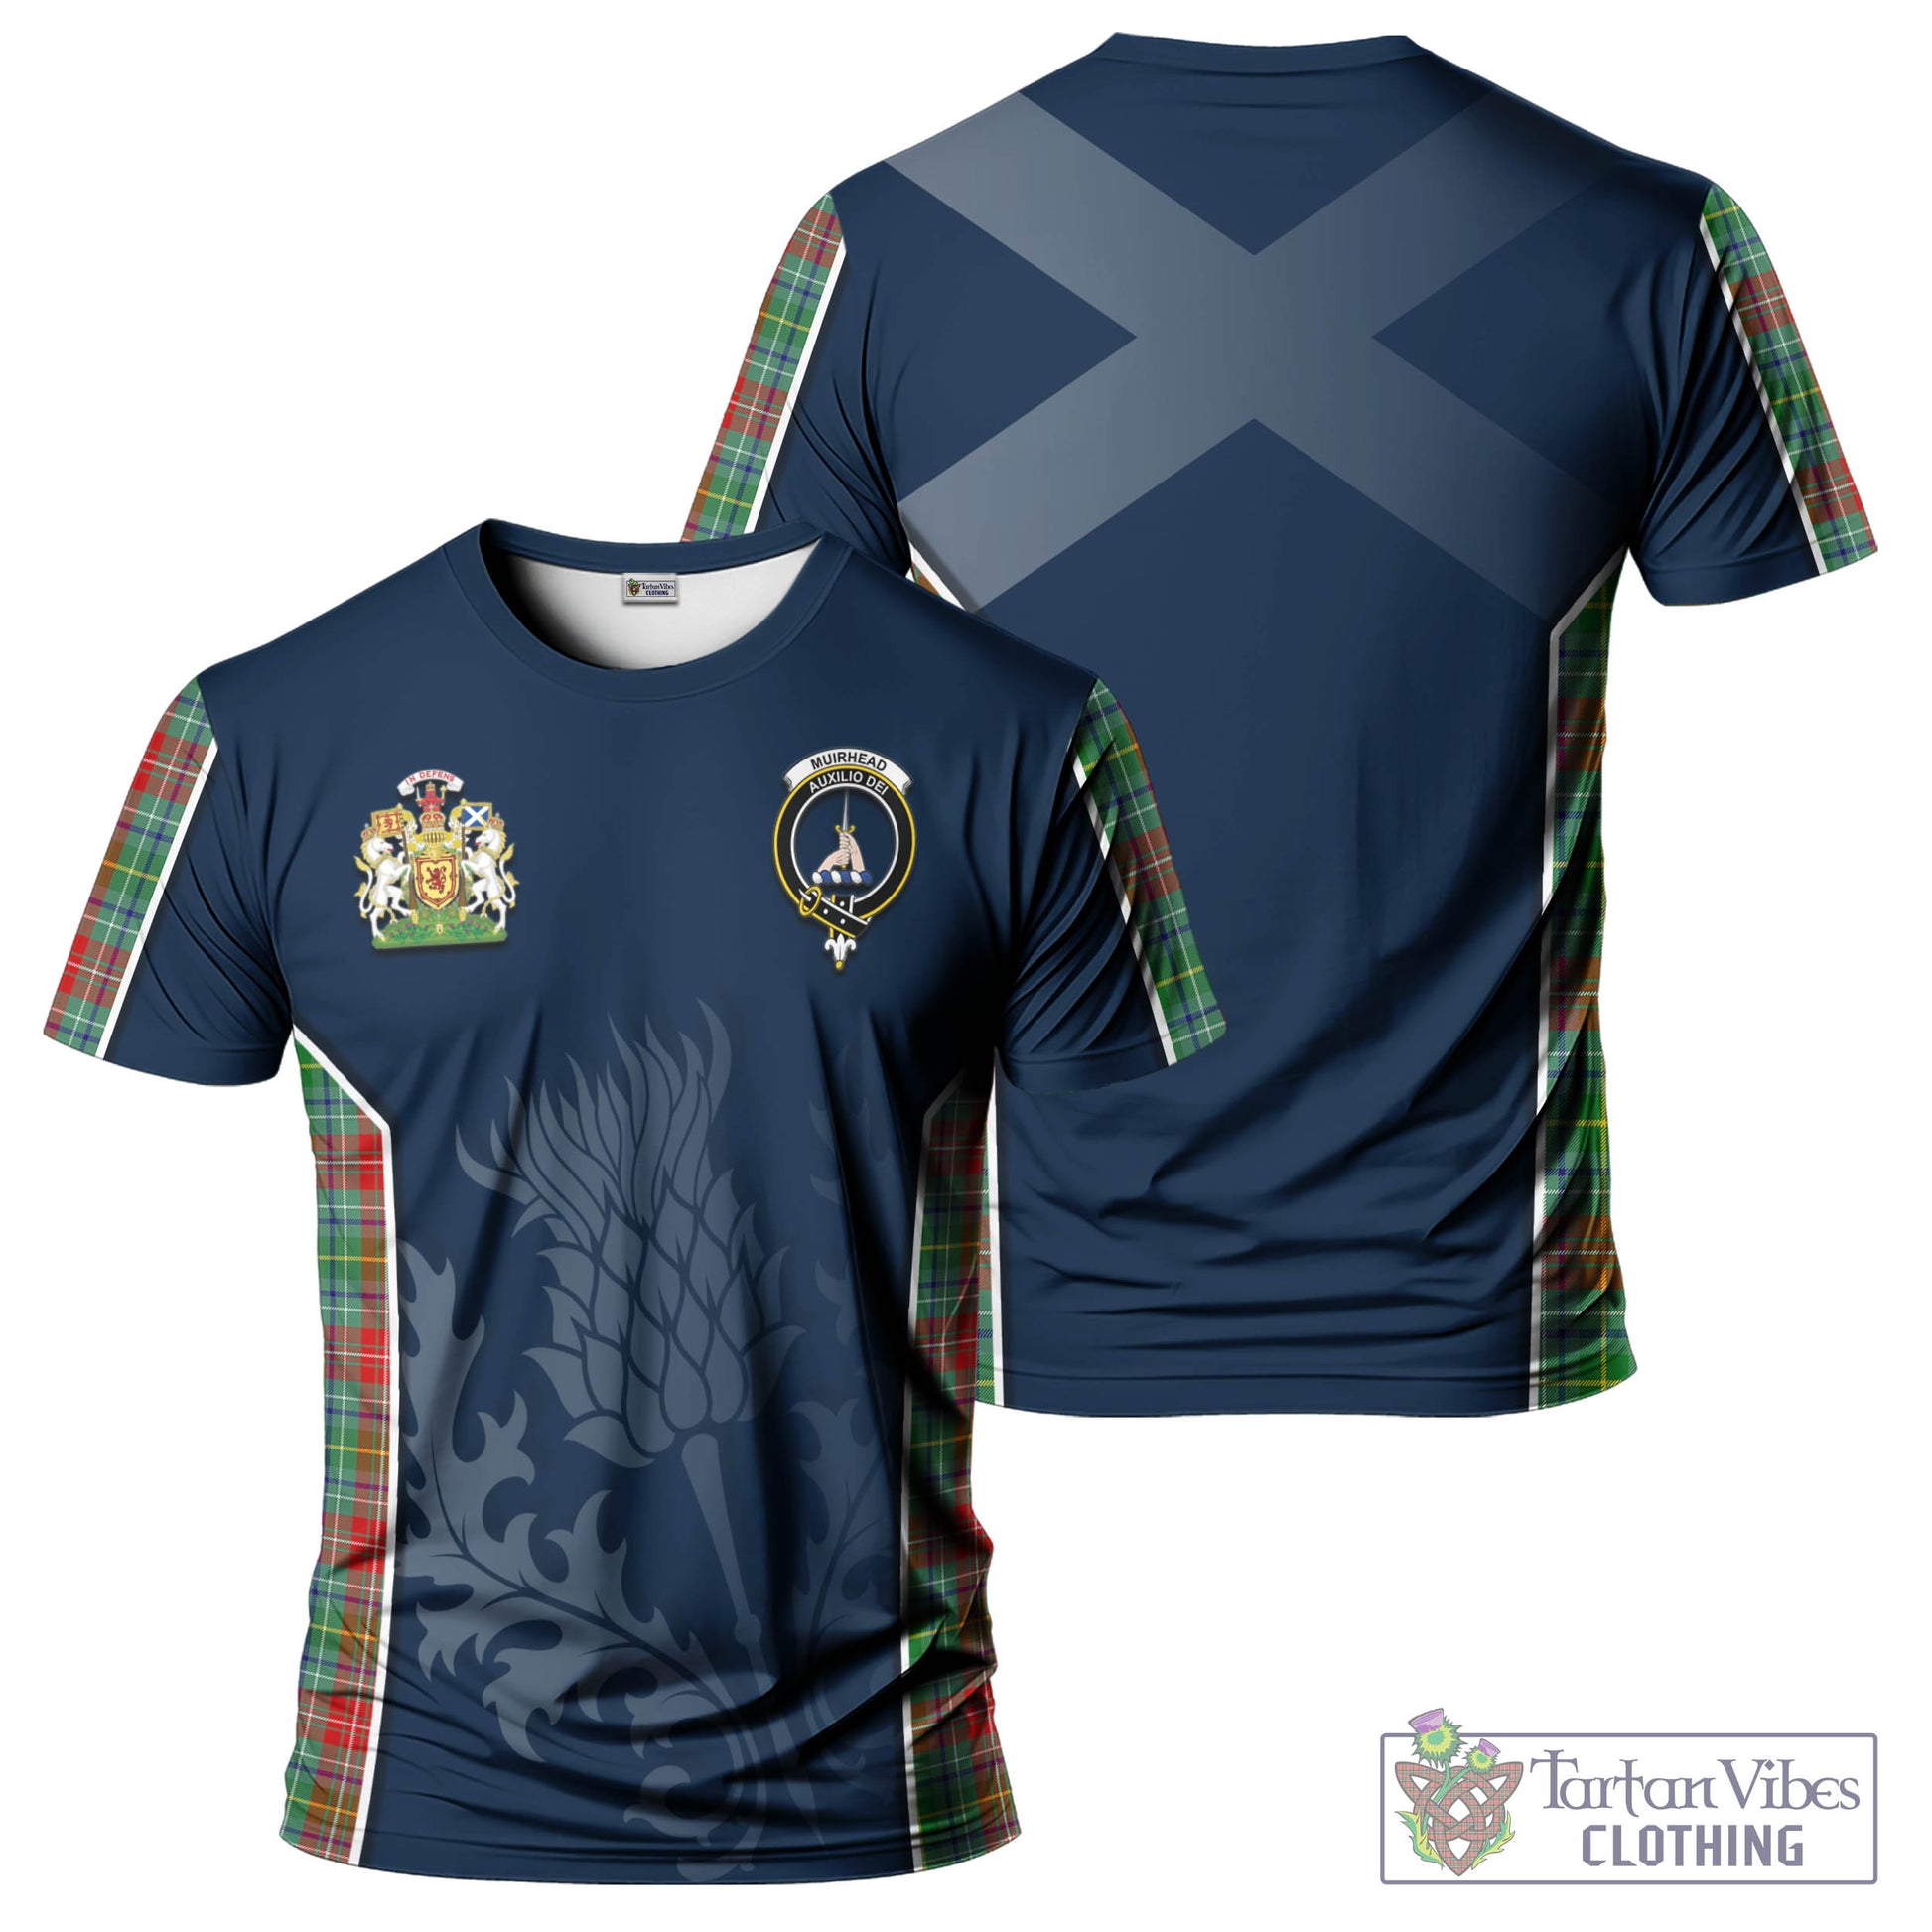 Tartan Vibes Clothing Muirhead Tartan T-Shirt with Family Crest and Scottish Thistle Vibes Sport Style